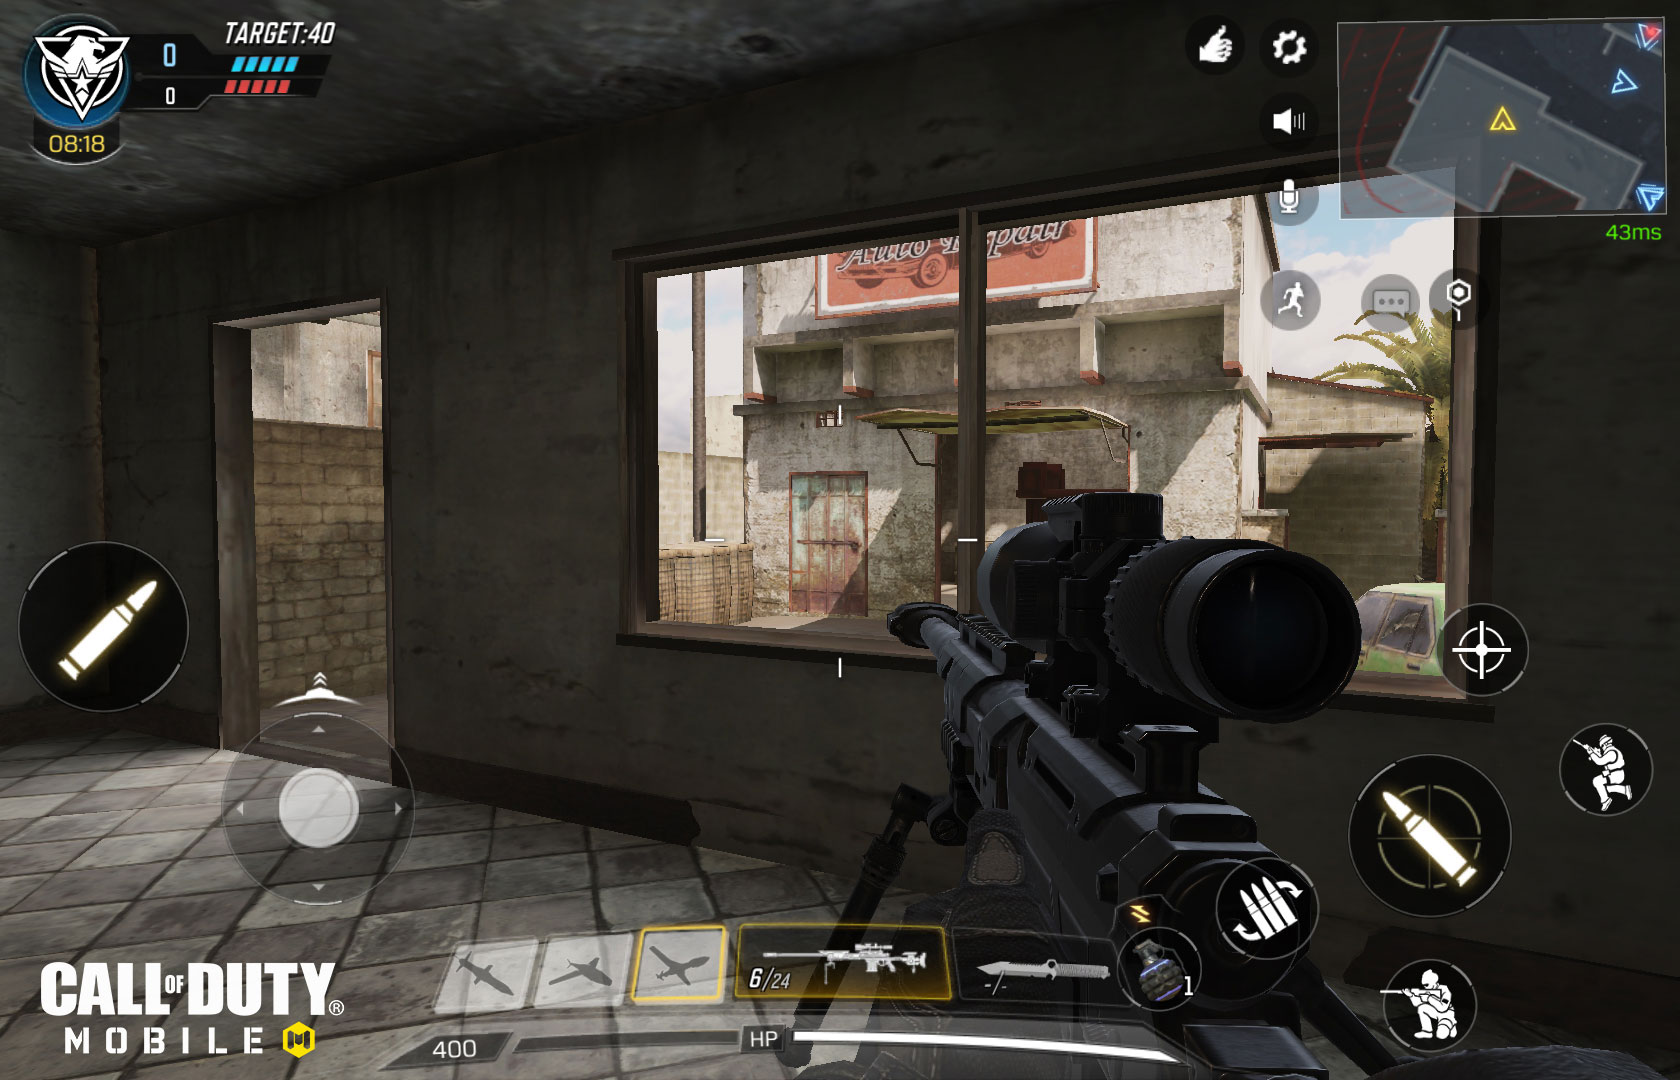 Getting a Grip on the Call of Duty® Mobile Controls